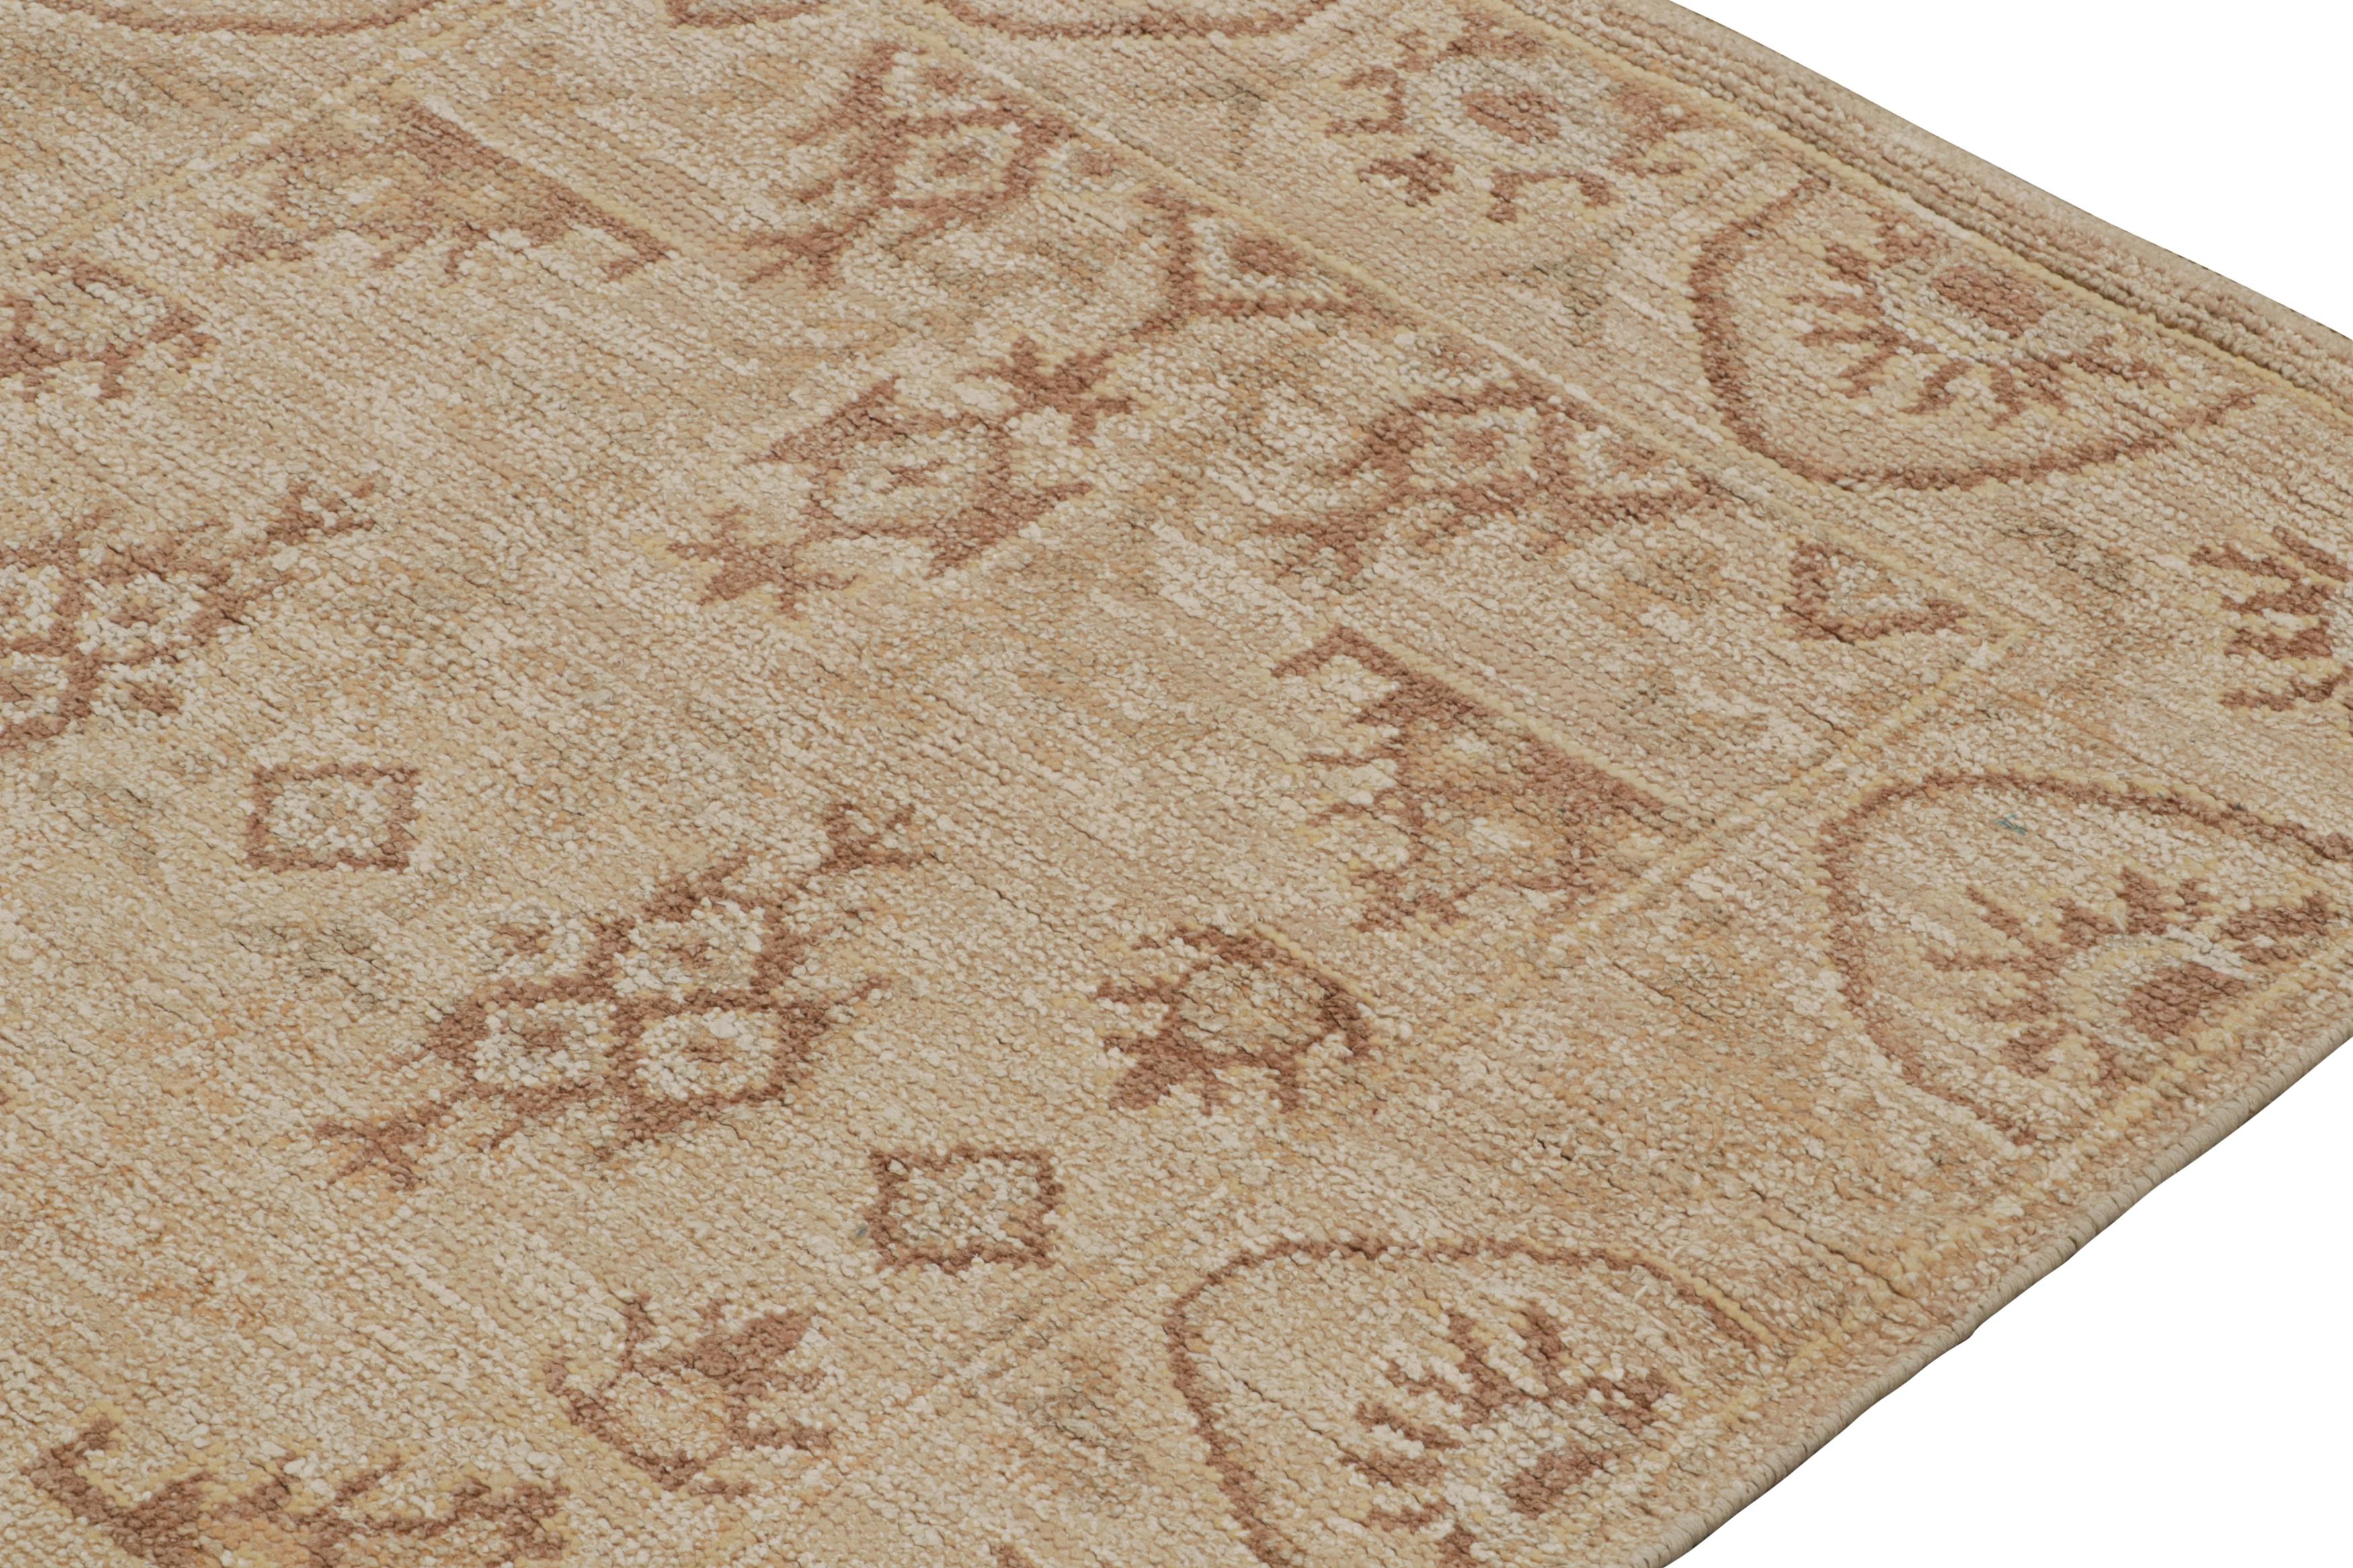 Rug & Kilim’s Oushak Style Rug in Beige-Brown Floral Pattern In New Condition For Sale In Long Island City, NY